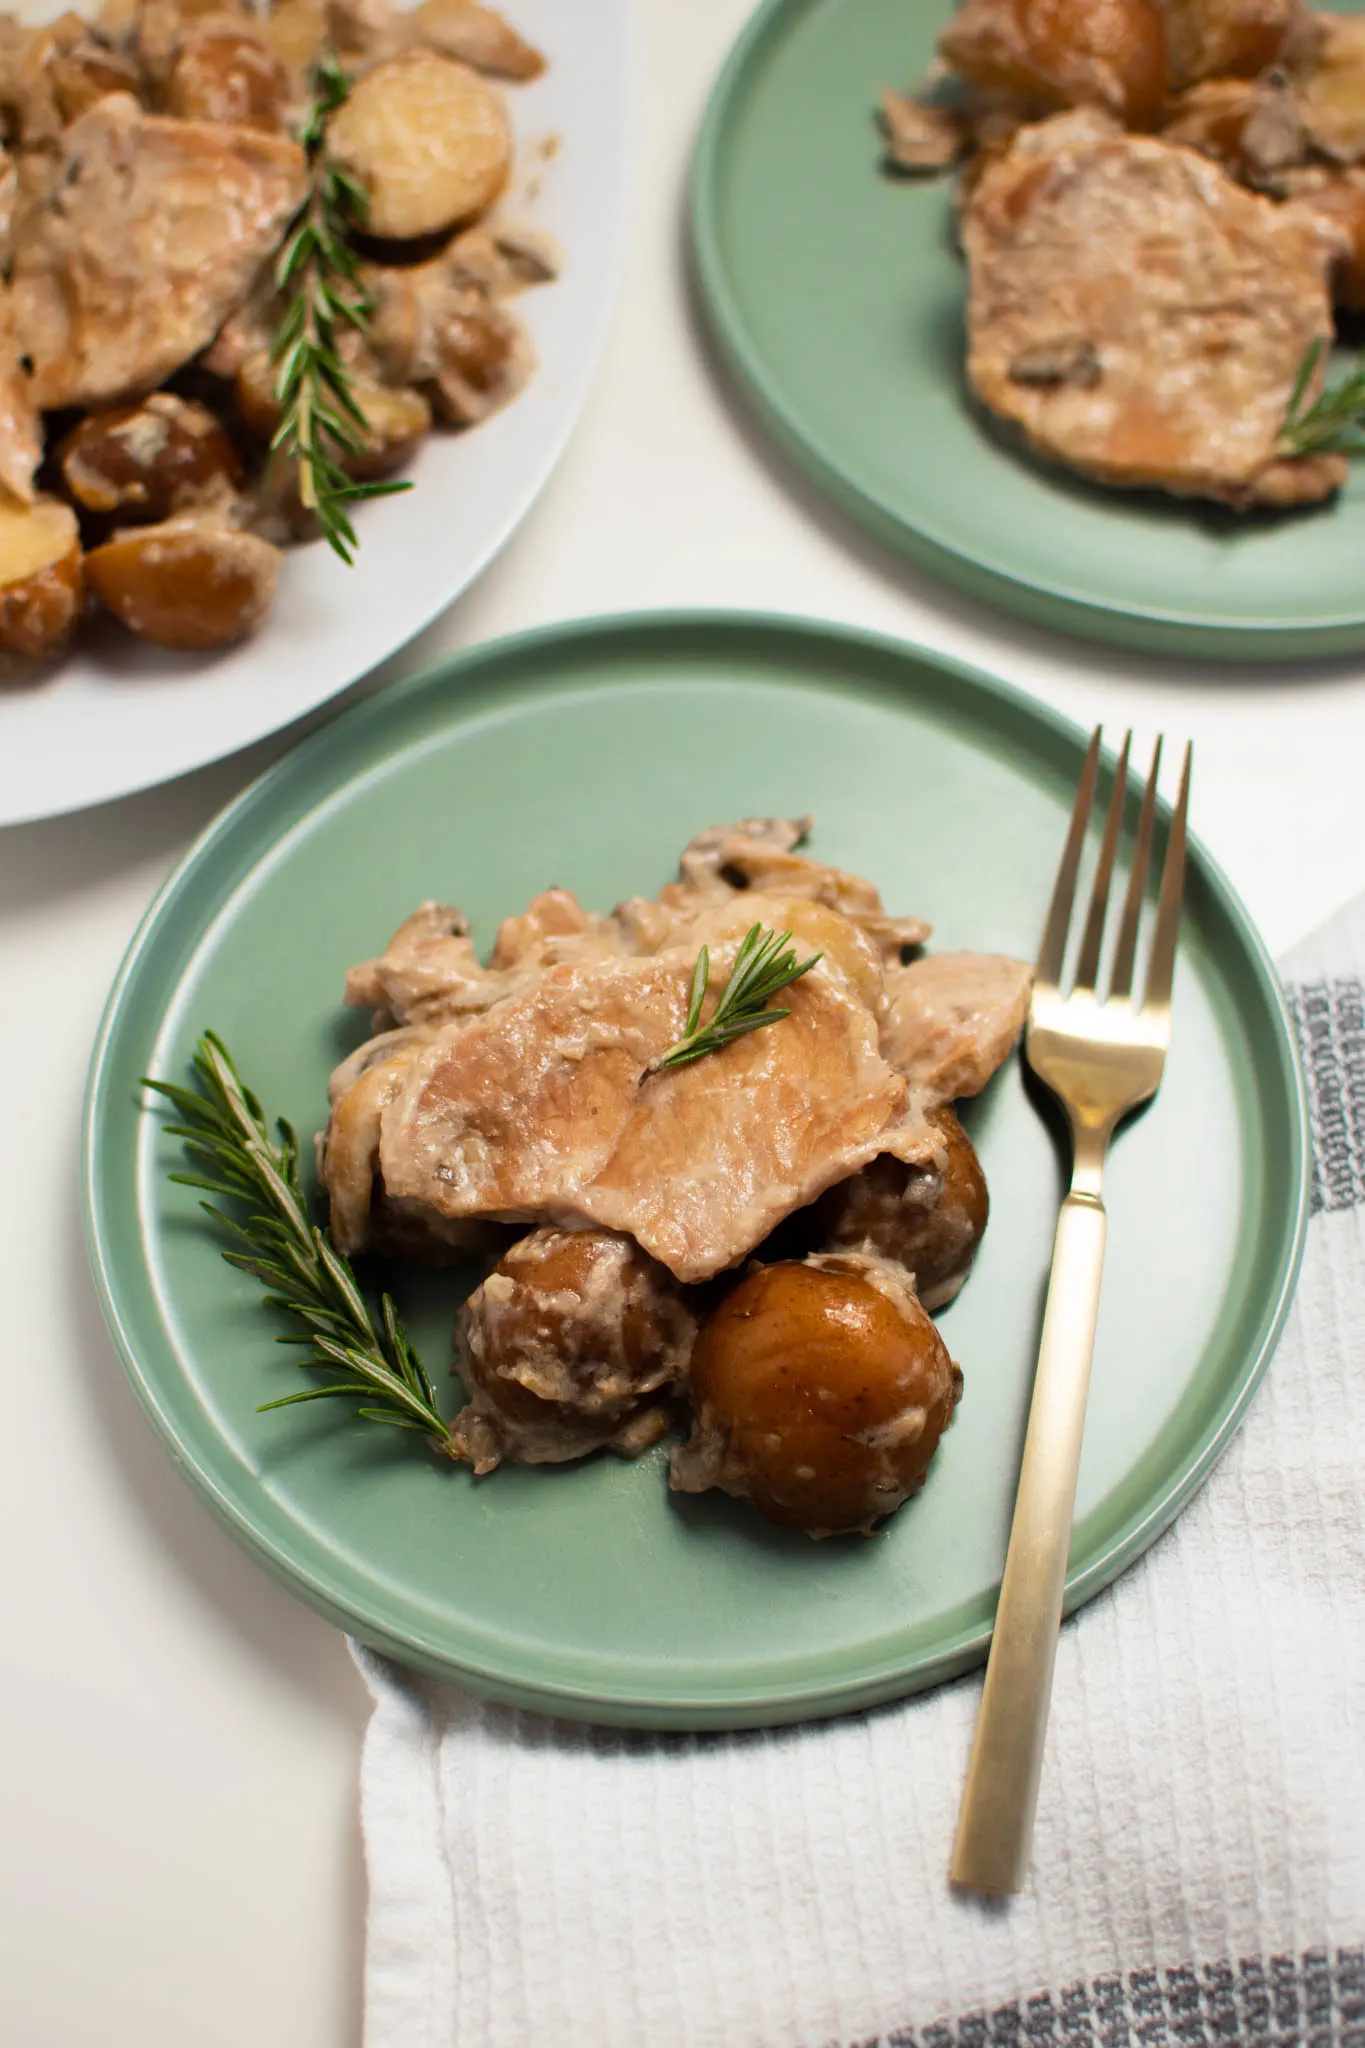 Two green plates with pork chops and red potatoes and sprigs of fresh rosemary on white table.